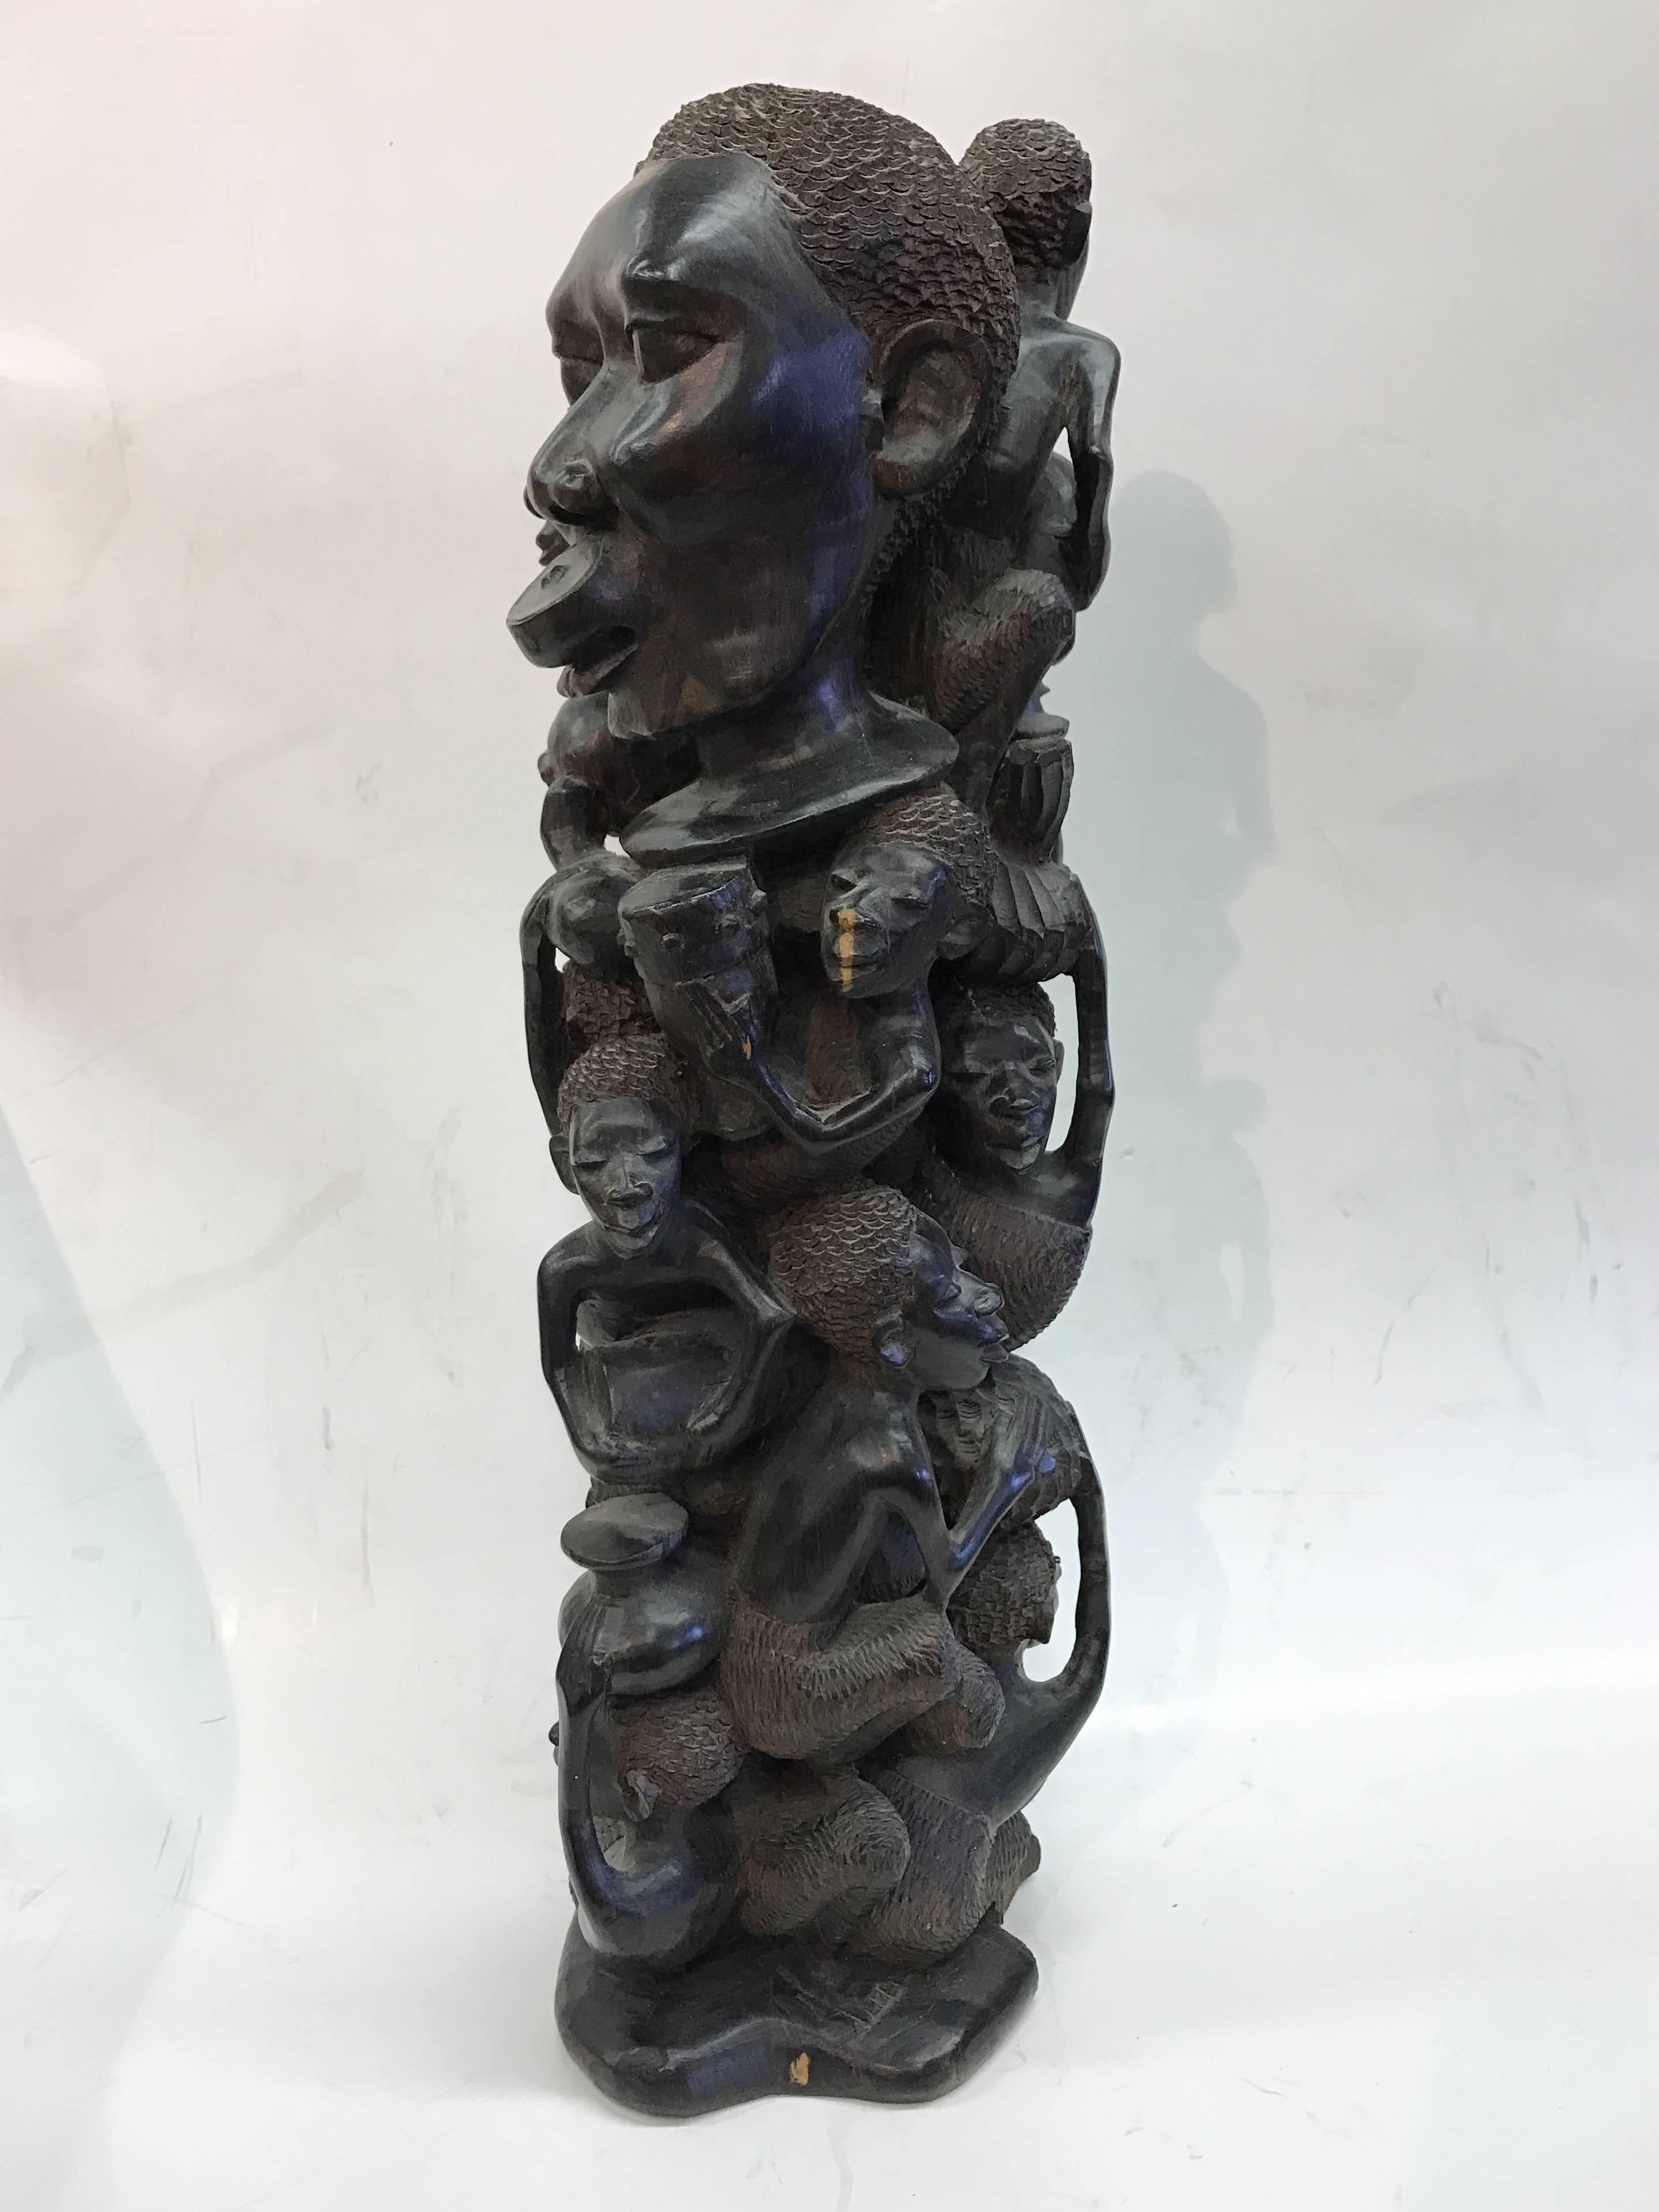 Beautifully "Tree of Life" carving attributed to the Makonde Tribe, known for their intricate carvings.

This piece likely depicts members of one family through many generations, carved from a single piece of wood. Very good condition